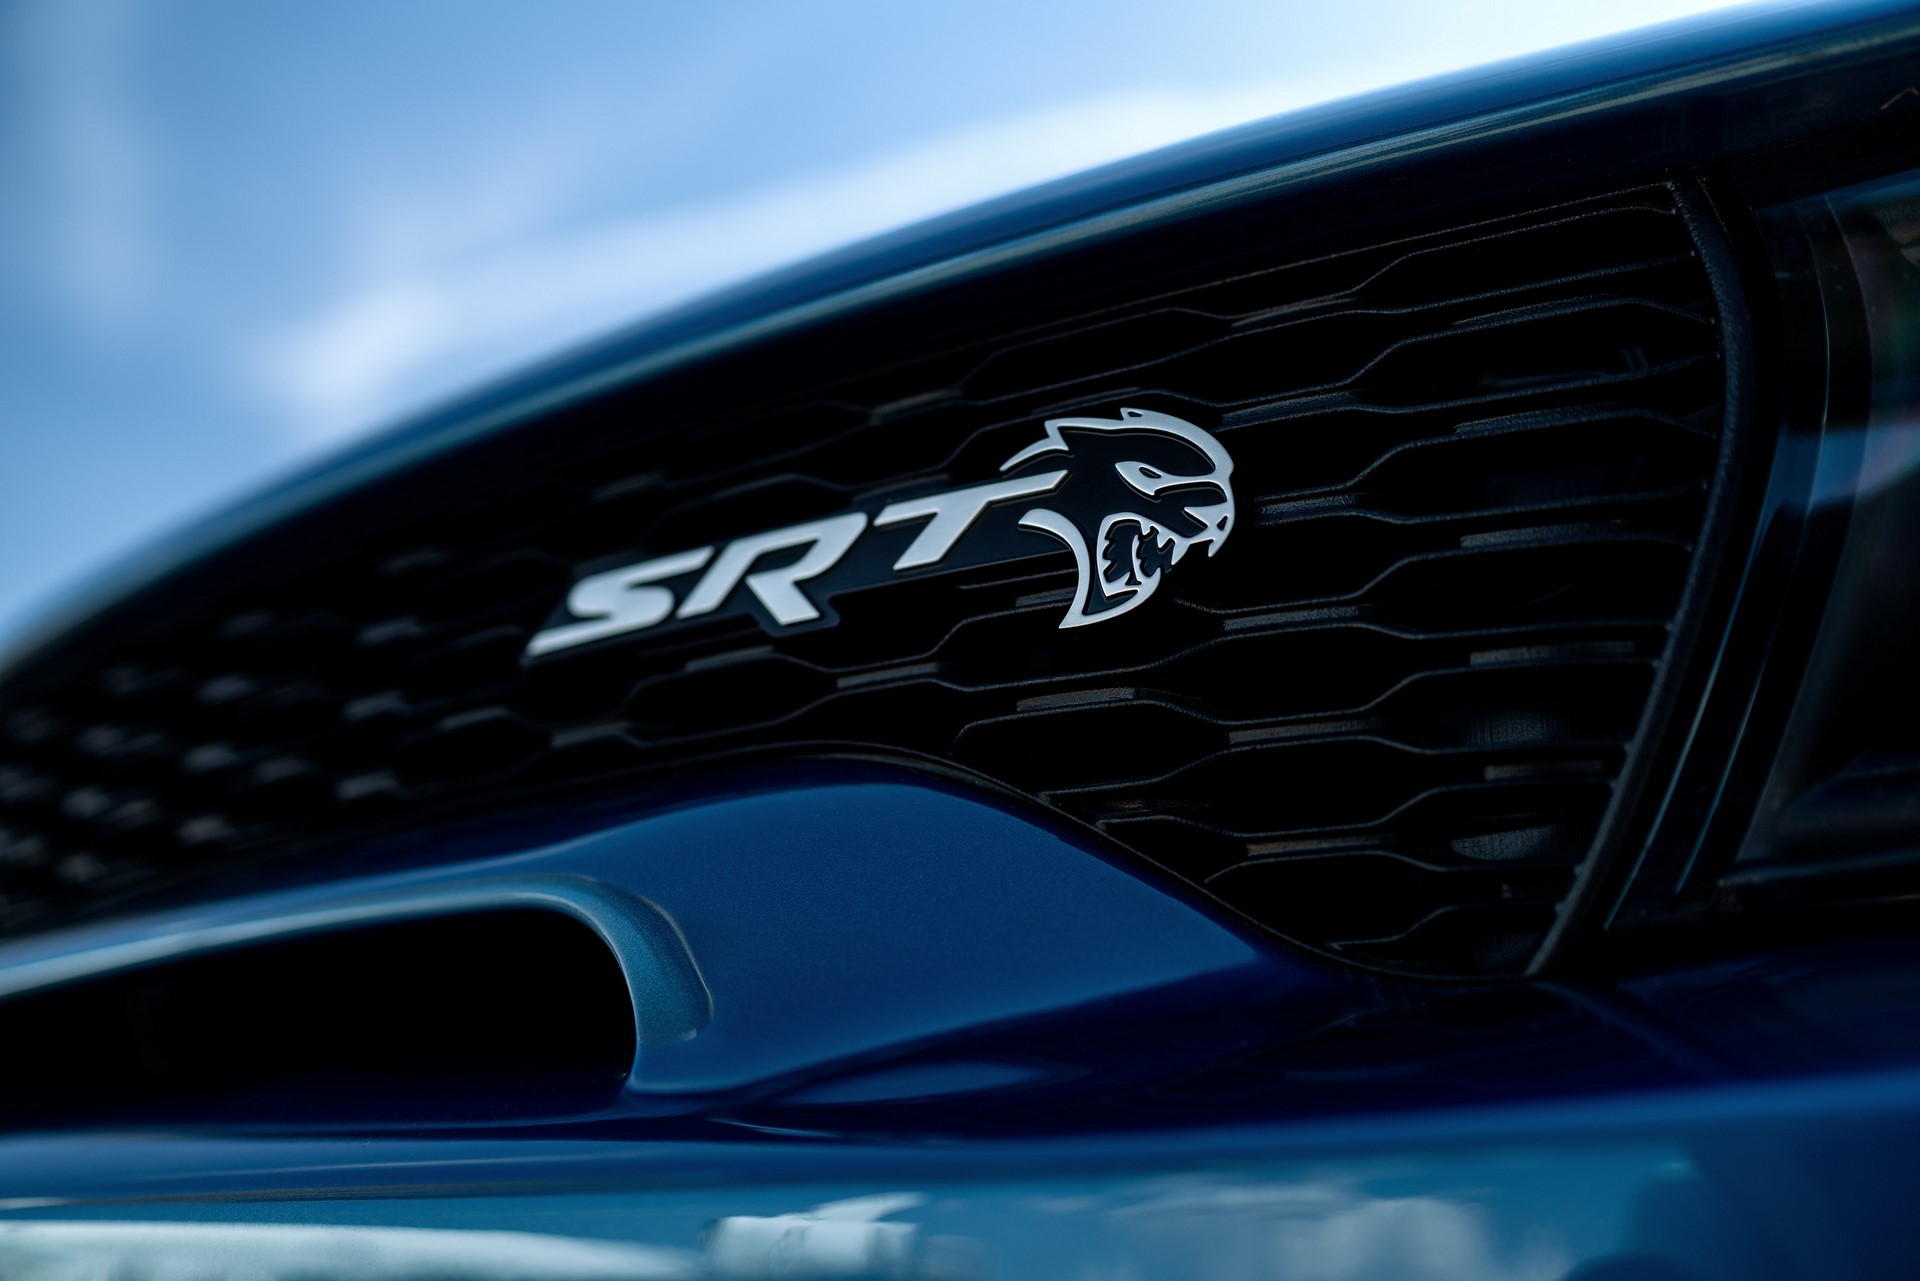 Newly designed front fascia on the 2020 Dodge Charger SRT Hellcat Widebody includes a new mail slot grille opening, providing the most direct route for cool air to travel into the radiator, to maintain ideal operating temperature even in the hottest conditions